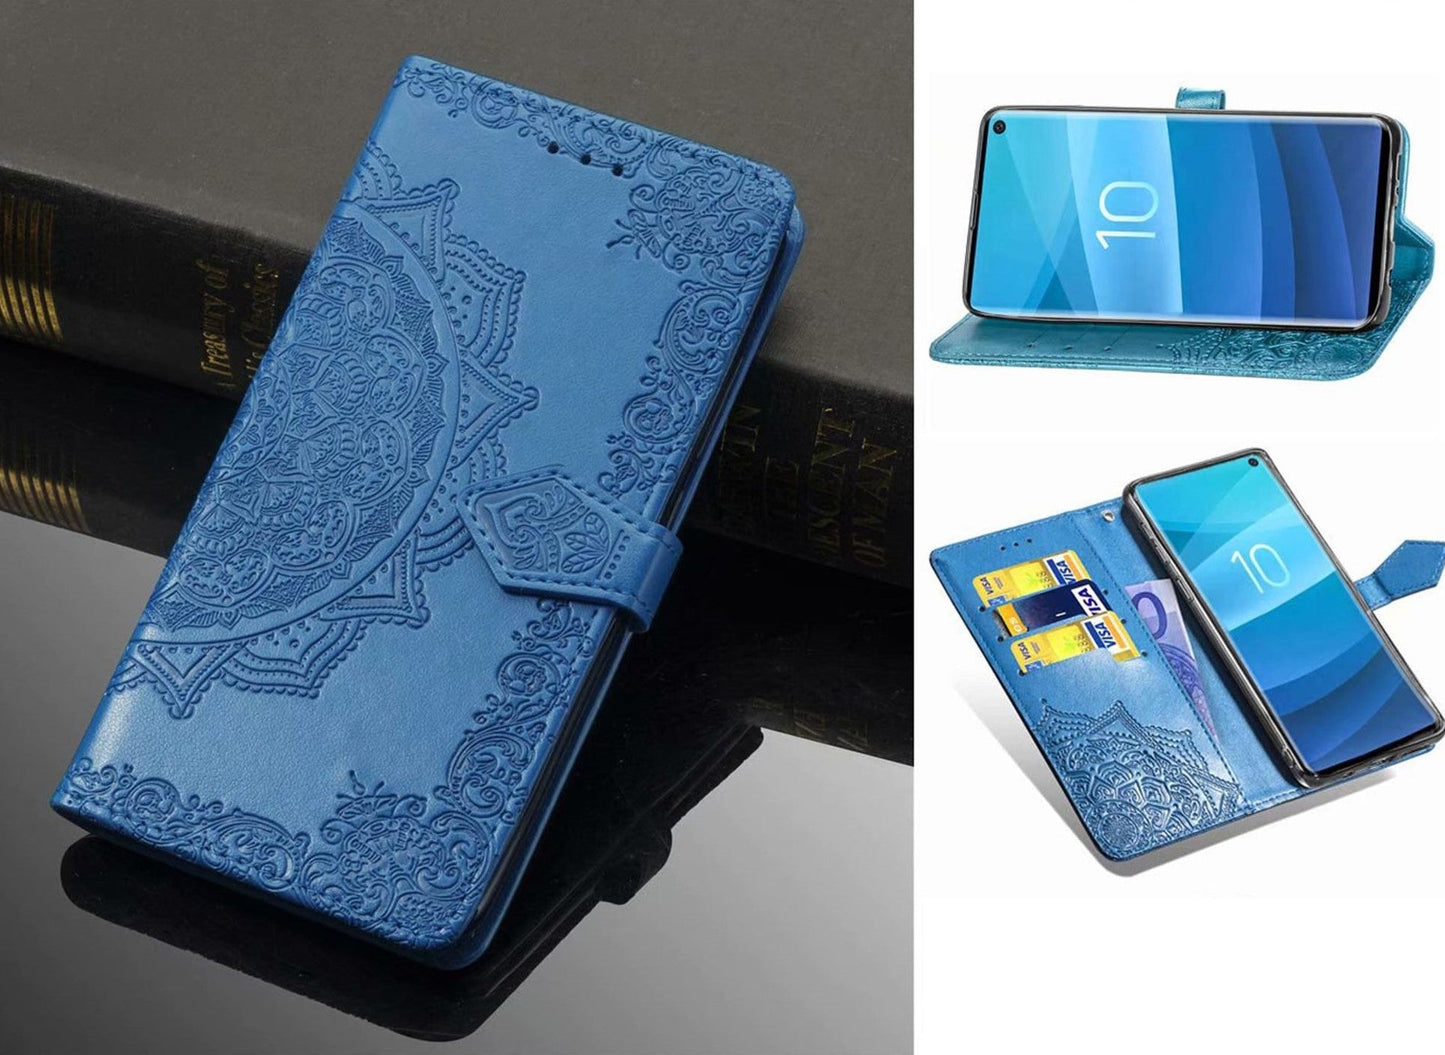 iPhone 11 Case Wallet Cover Blue